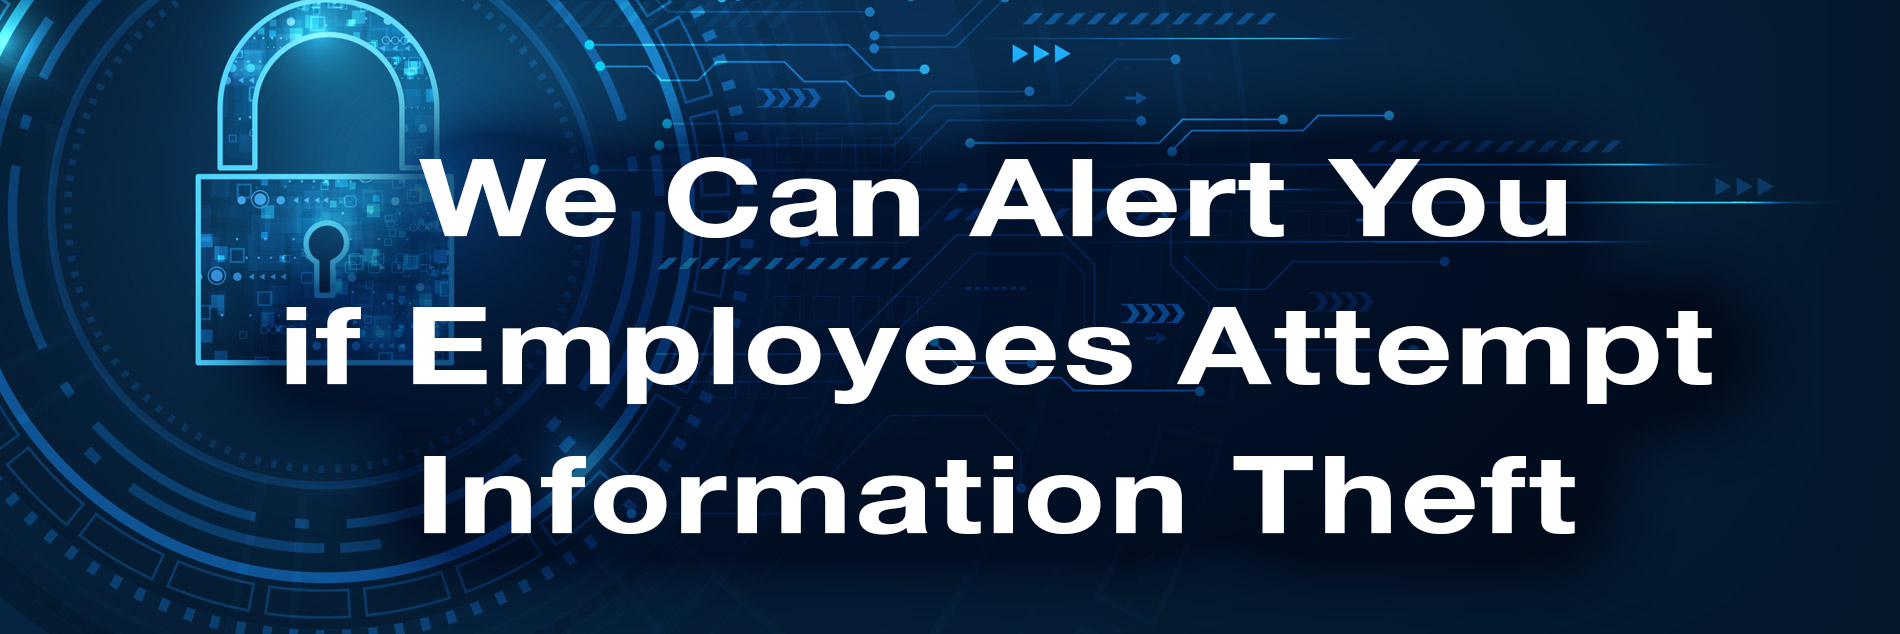 We Can Alert You If Employees Attempt Information Theft